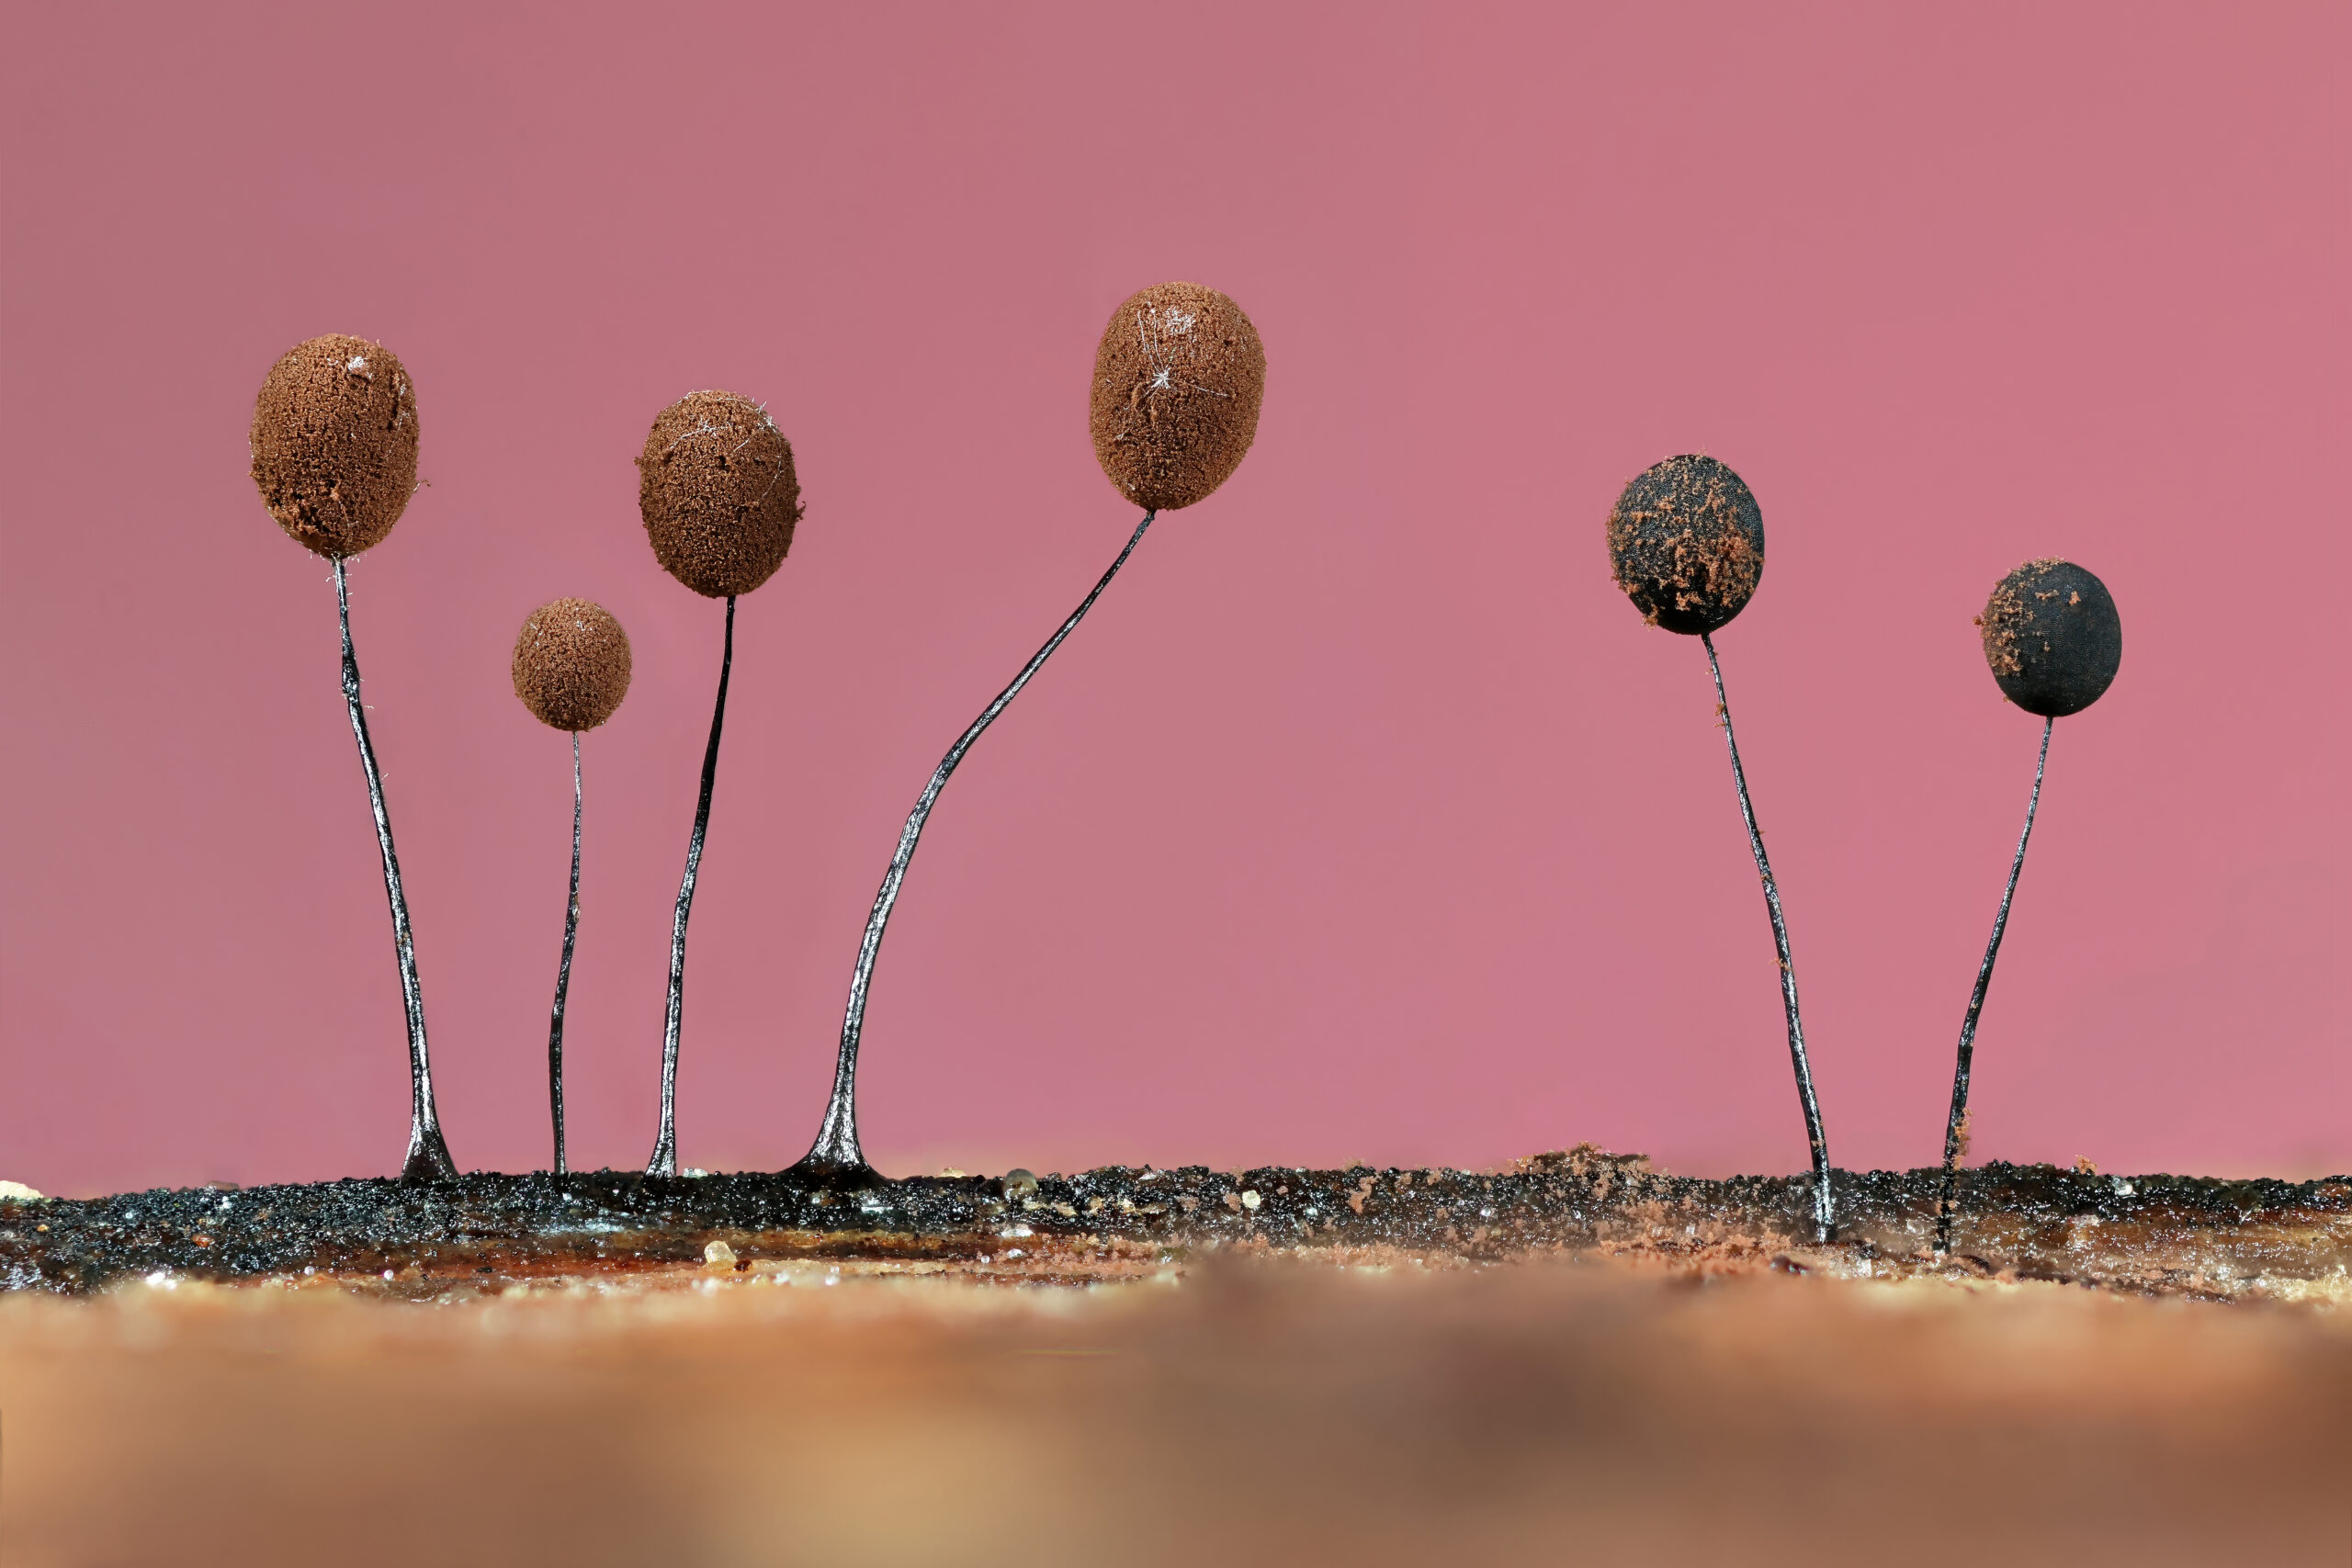 four slime mould heads poke upwards, resembling tulips, against a pink background